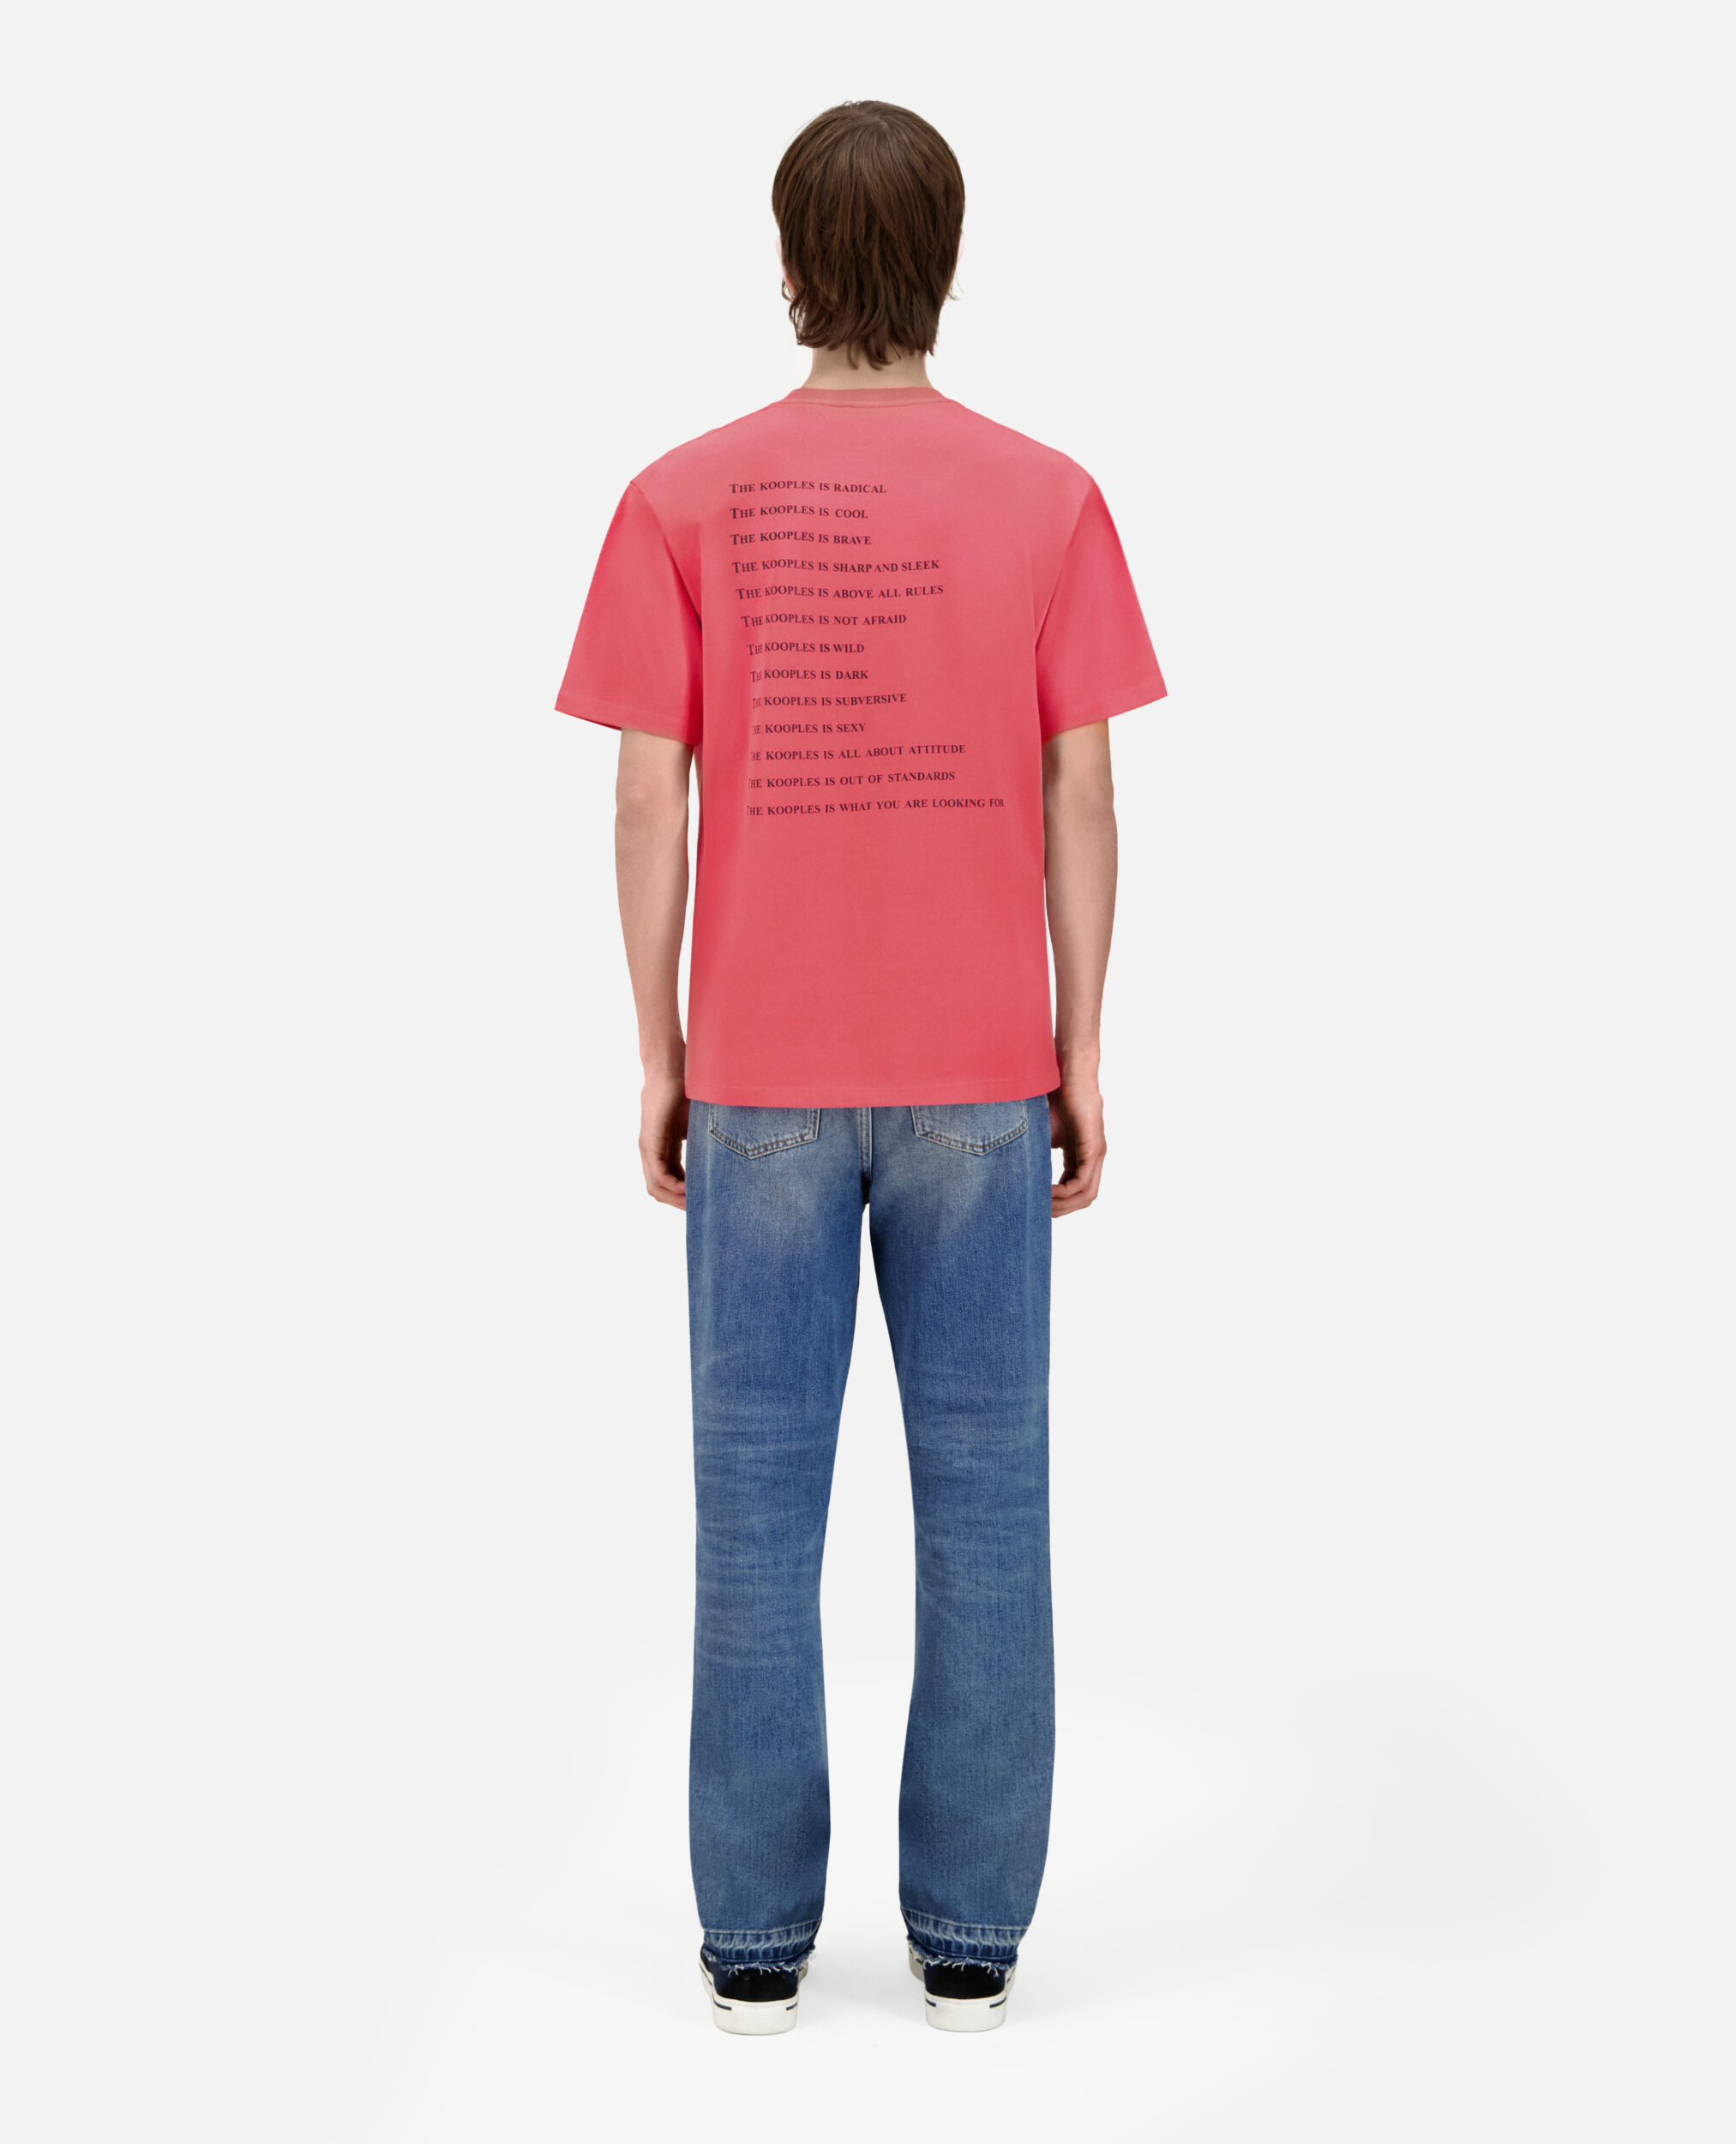 Rosa T-Shirt mit What is-Schriftzug, RETRO PINK, hi-res image number null